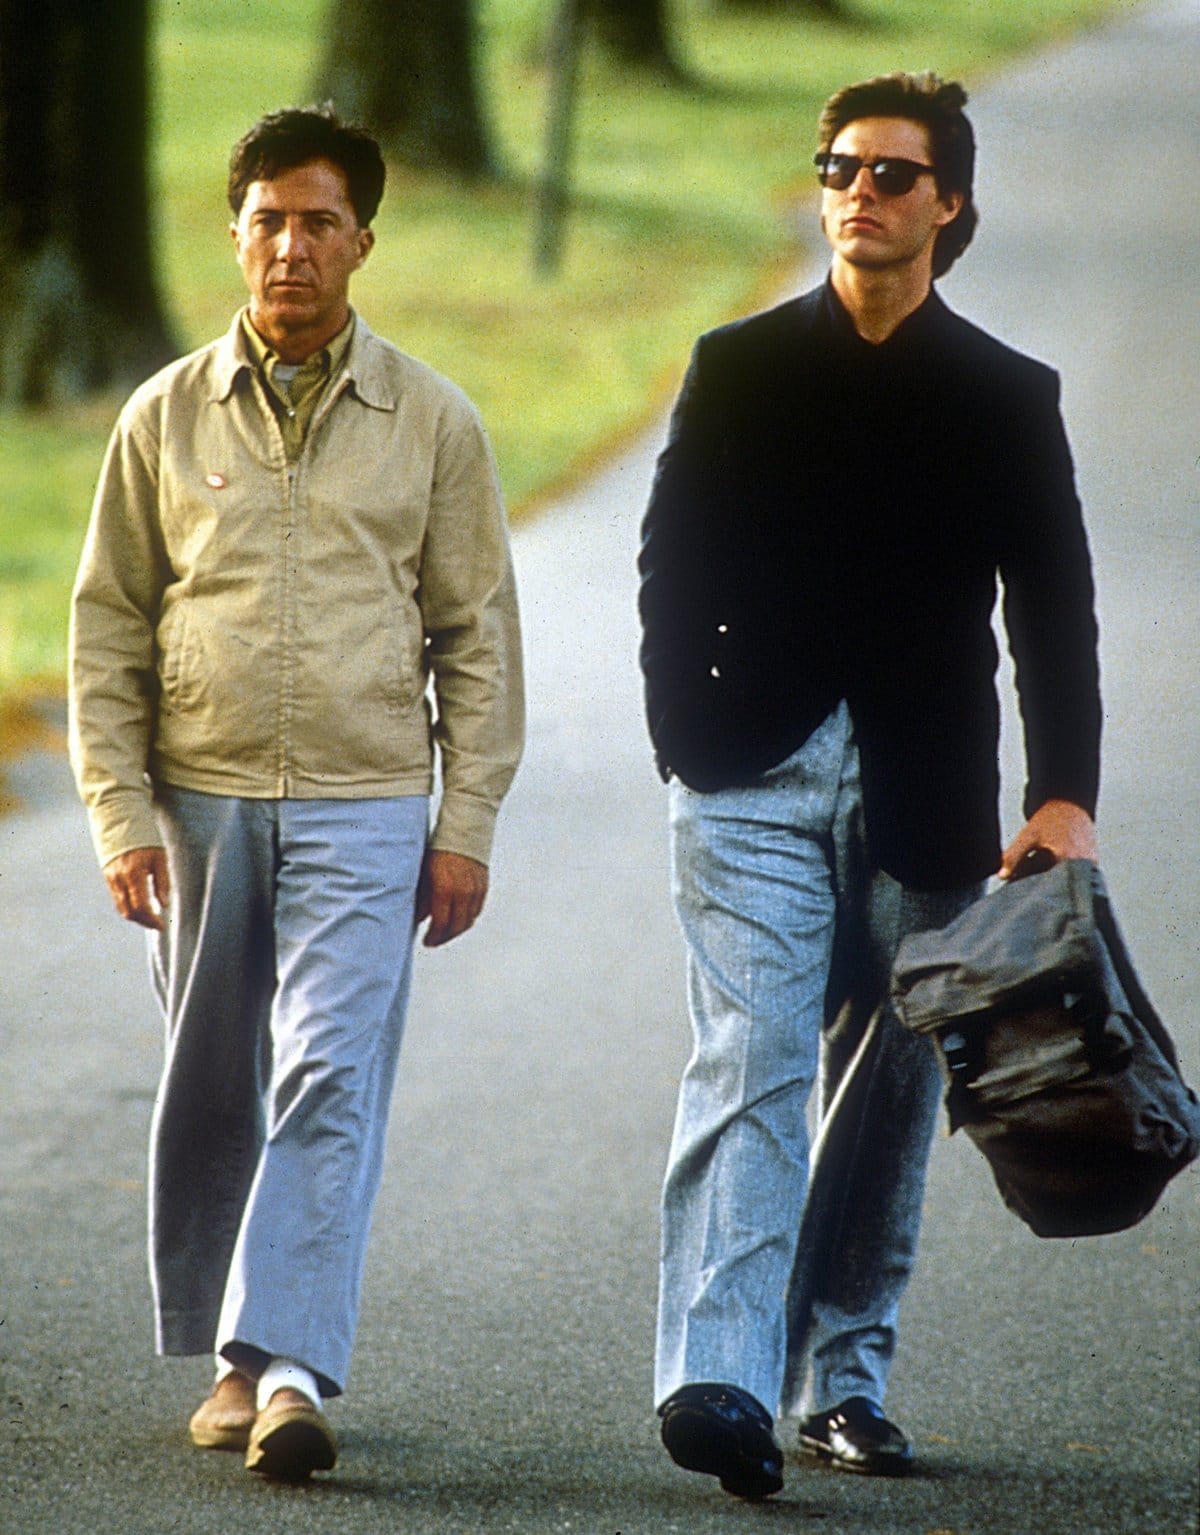 When the 1988 American road drama film "Rain Man" was released in the United States on December 16, 1988, Dustin Hoffman was 51 years old, while Tom Cruise was 26 years old